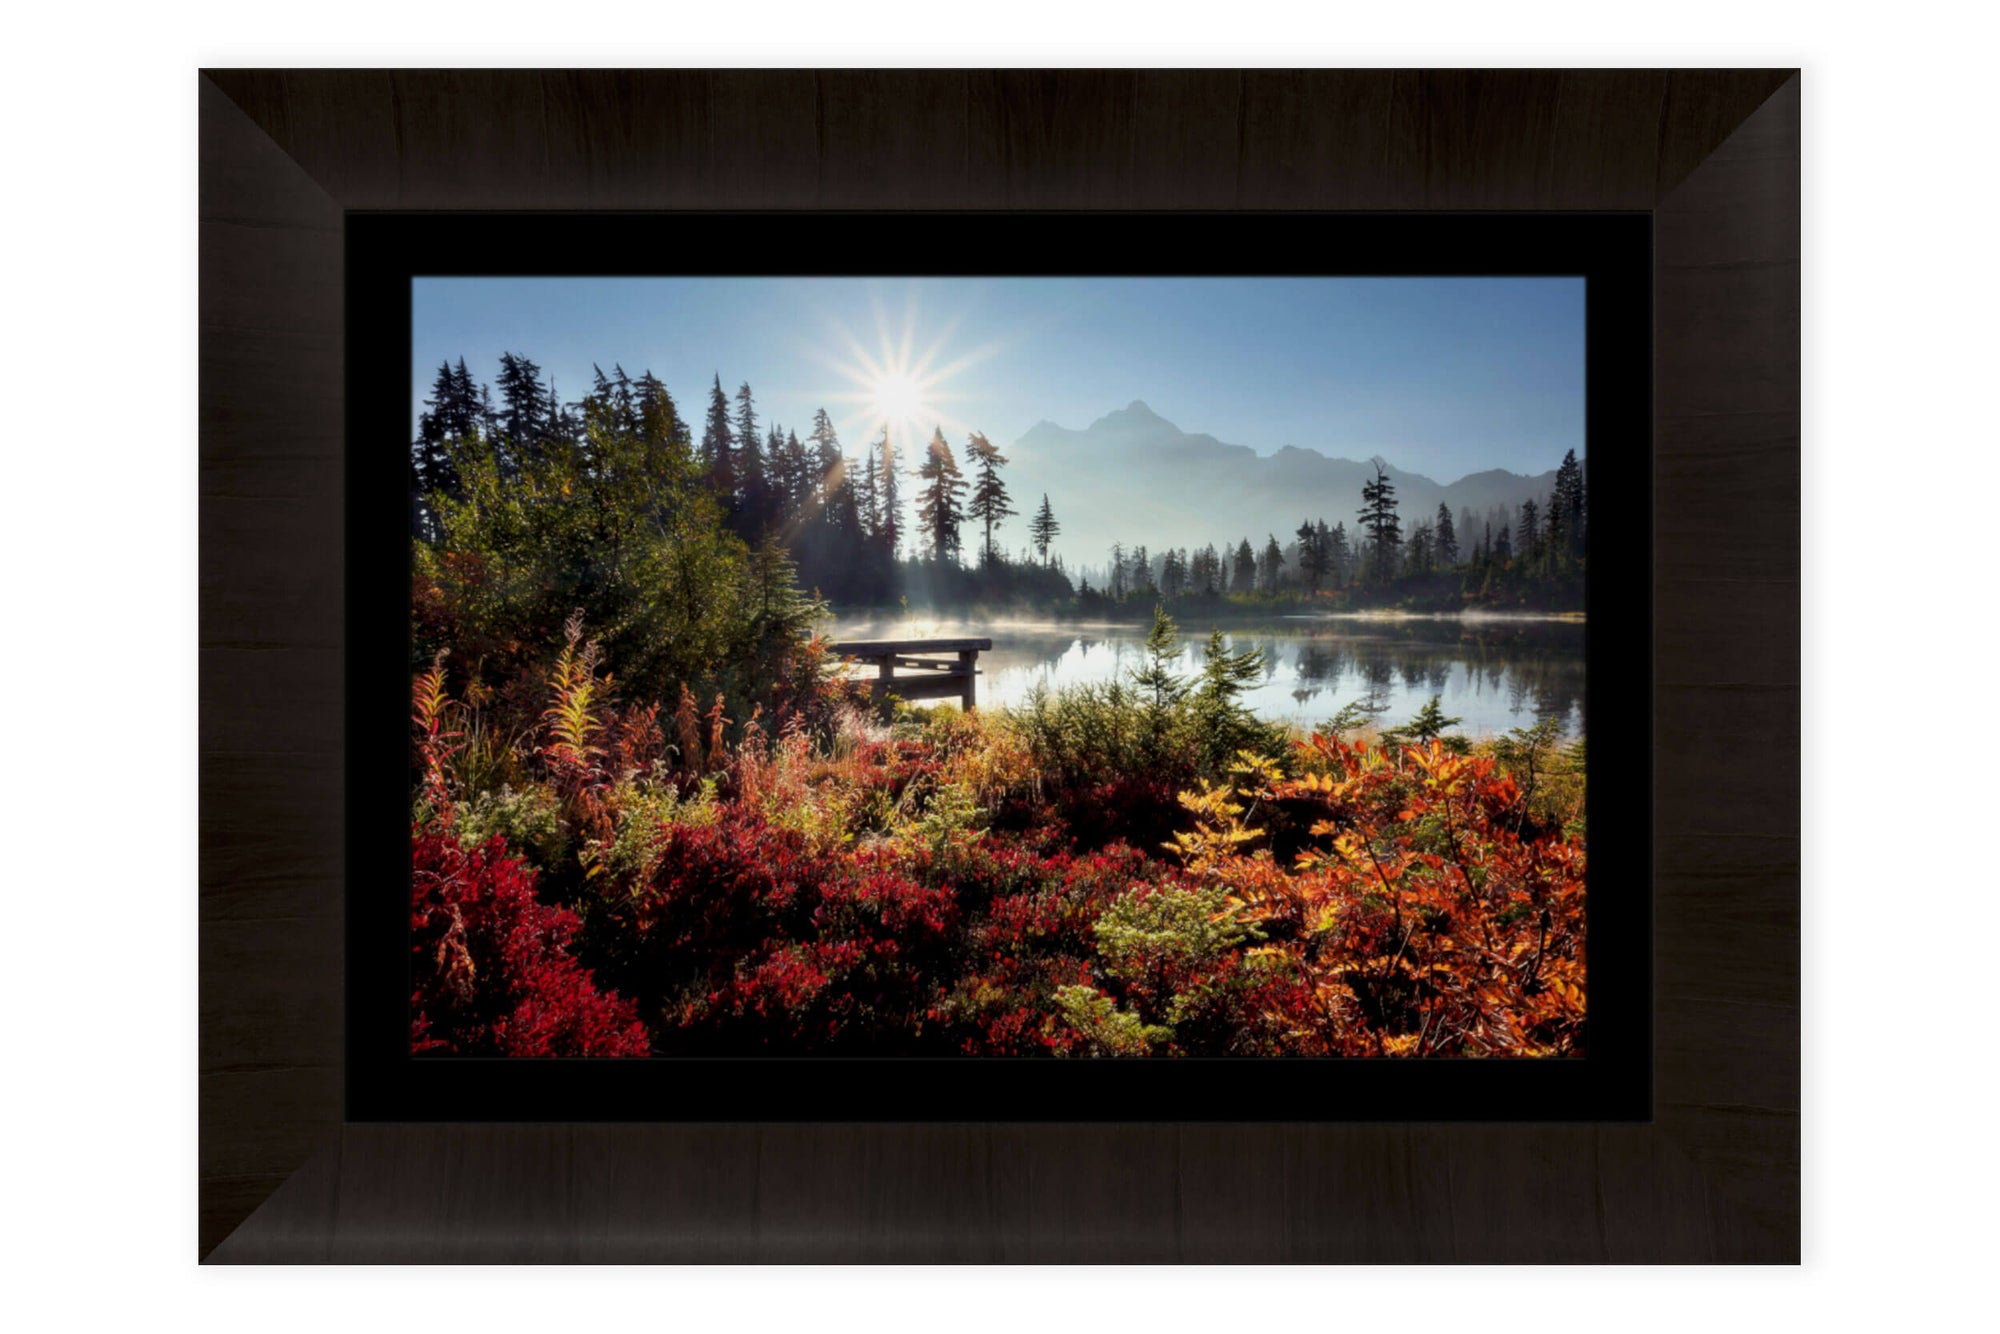 A piece of framed art from Picture Lake created near Mount Baker in Washington.